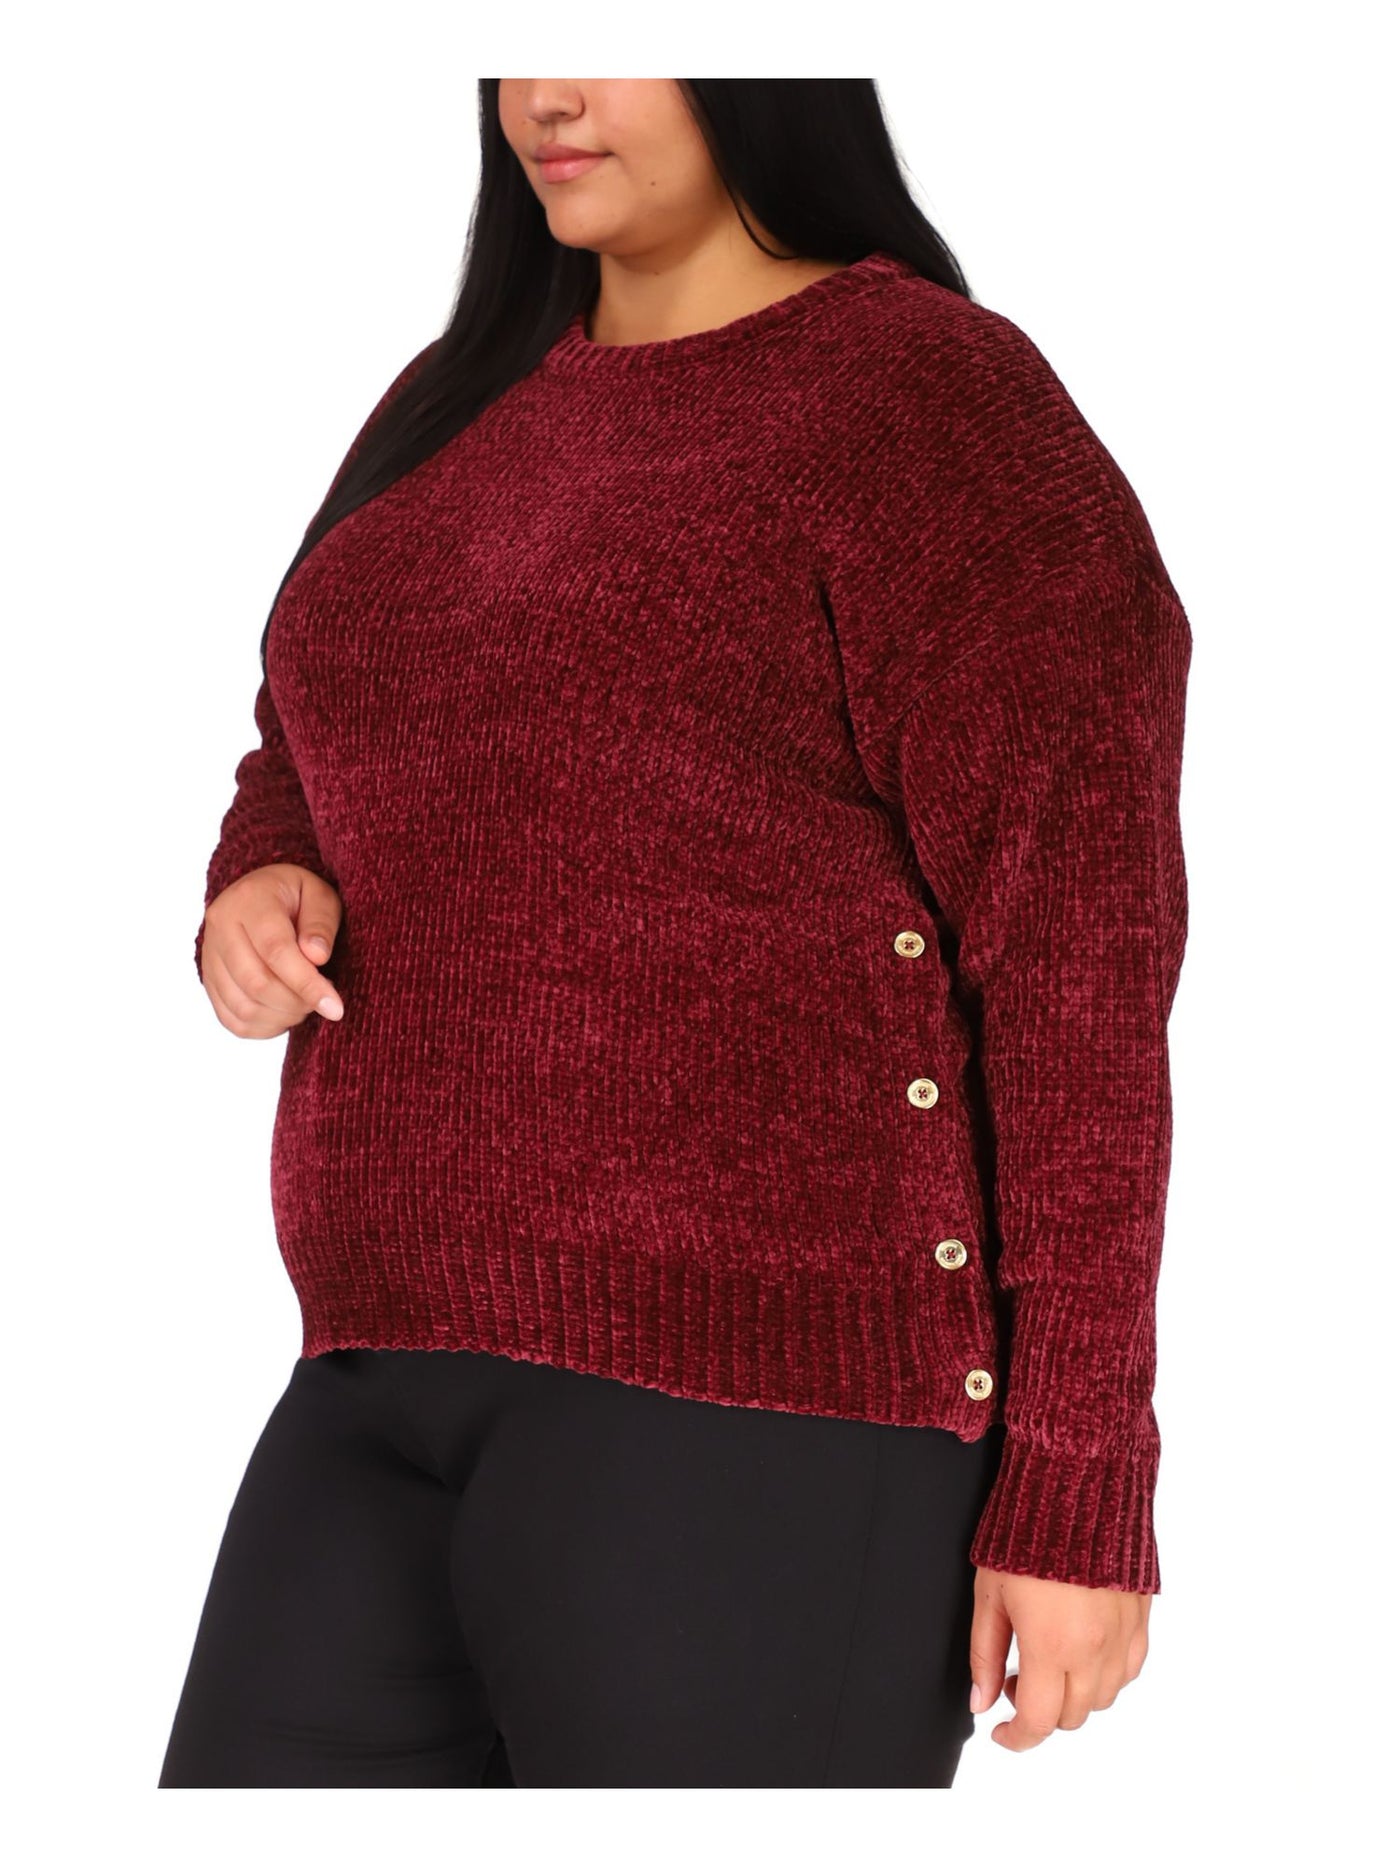 MICHAEL KORS Womens Maroon Stretch Ribbed Button Detail Long Sleeve Round Neck Sweater Plus 3X